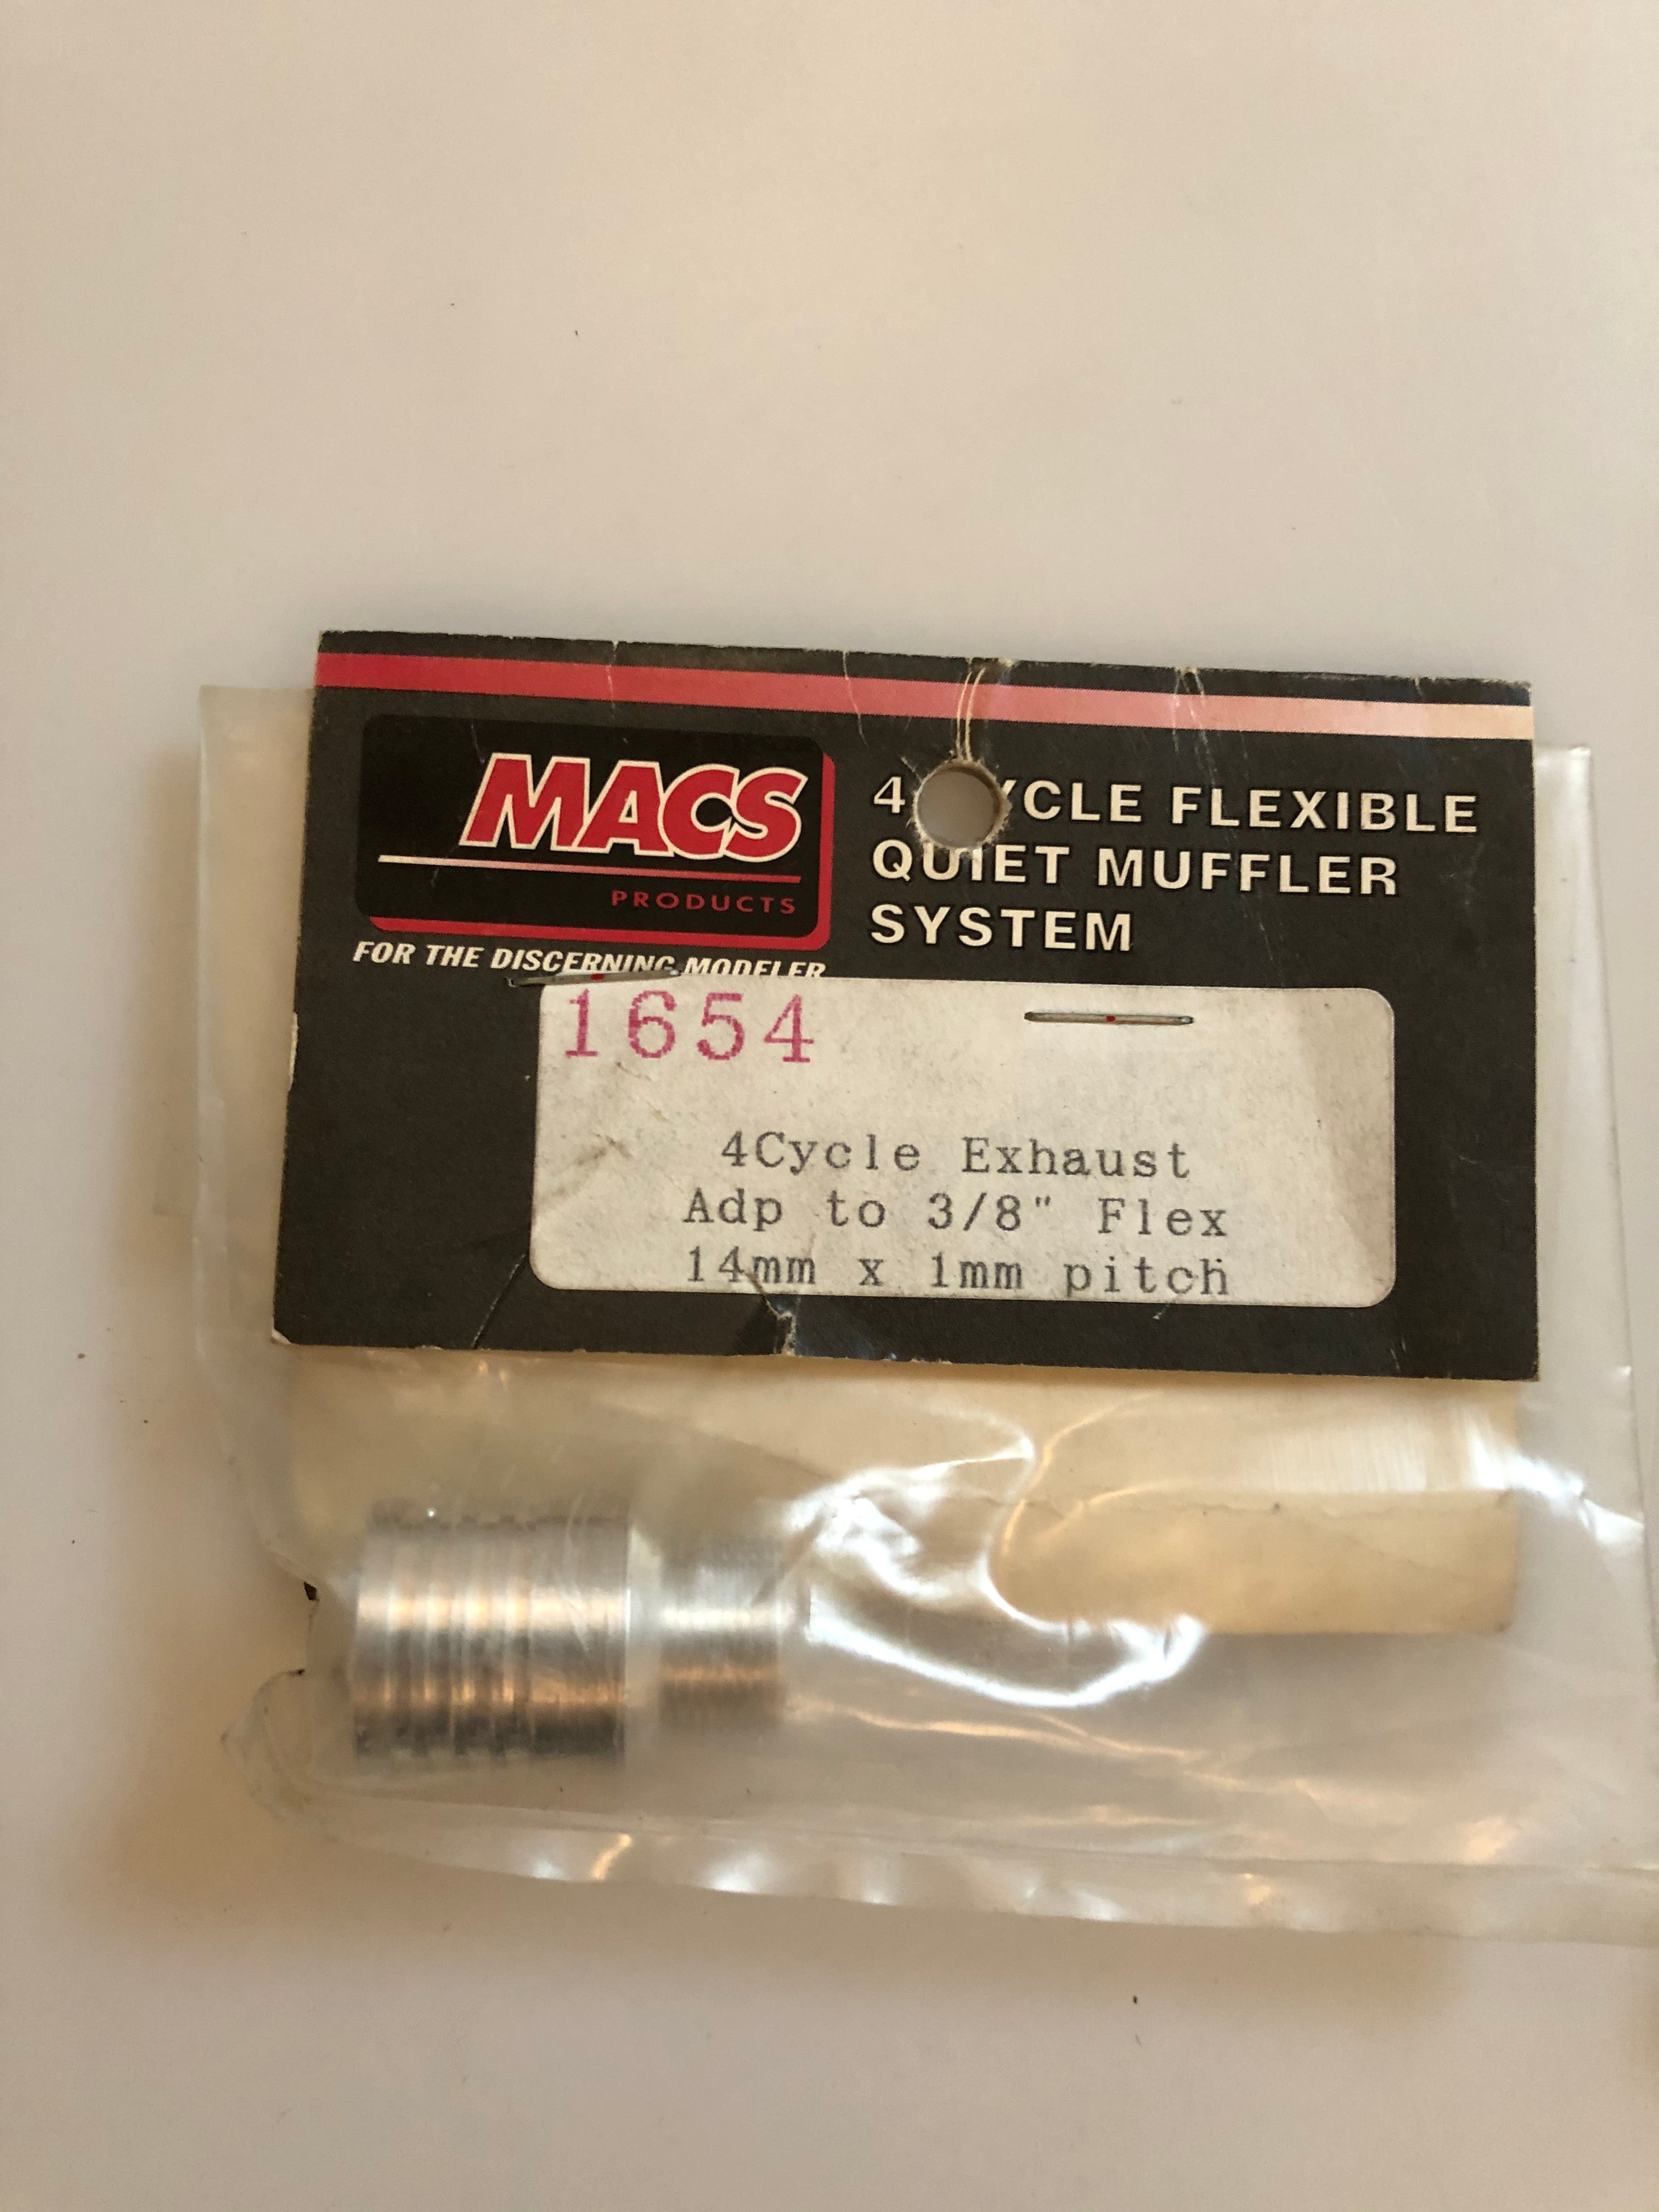 MACS Products 4 Cycle Exhaust Adpt to 3/8" Flex 14mm x 1mm pitch MAC1654